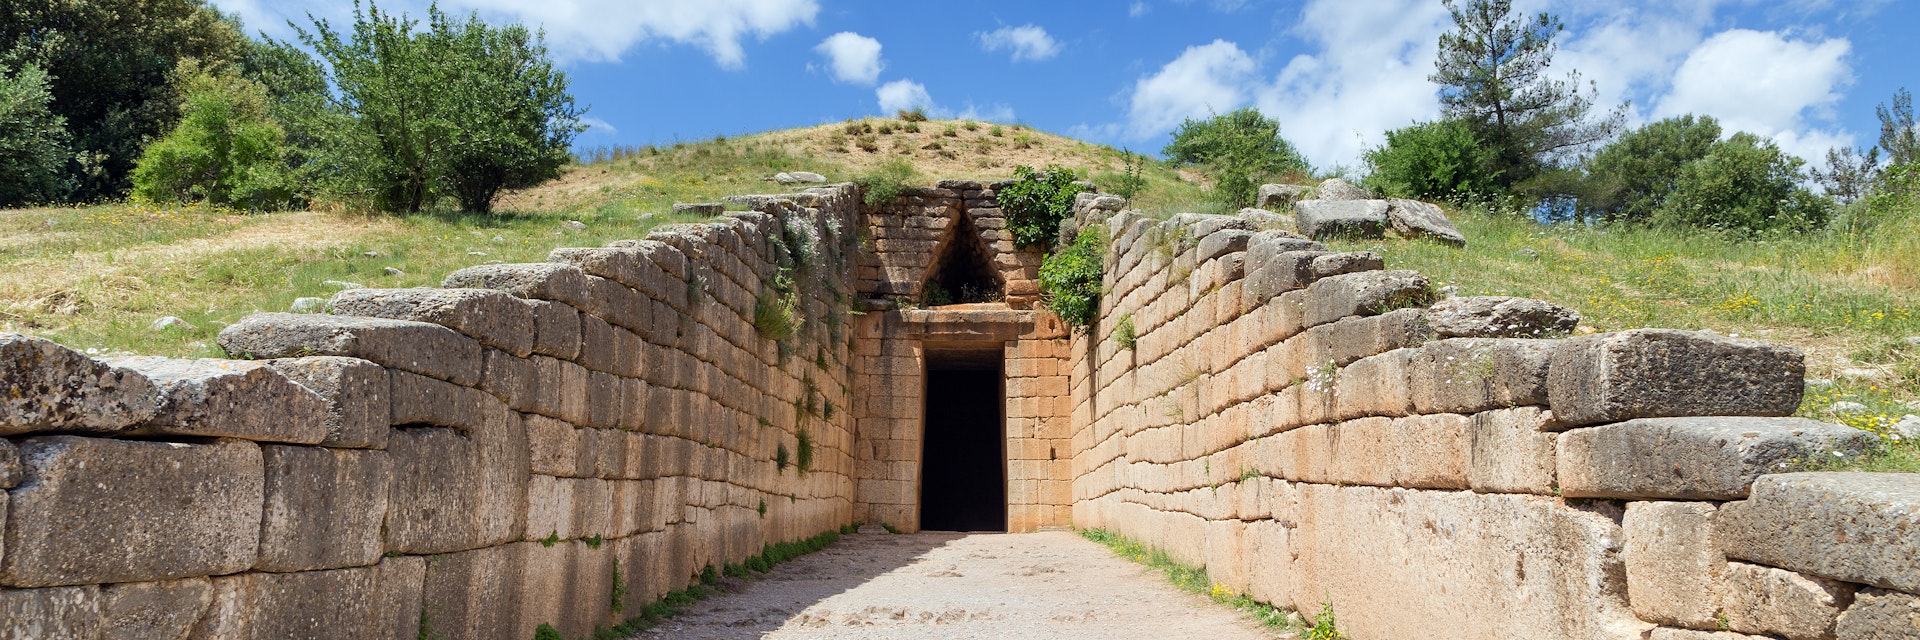 The Treasury of Atreus, or Tomb of Agamemnon, is an impressive "tholos" tomb at Mycenae, Greece, constructed during the Bronze Age around 1250 BC. The lintel stone above the doorway weighs 120 tons, the largest in the world.